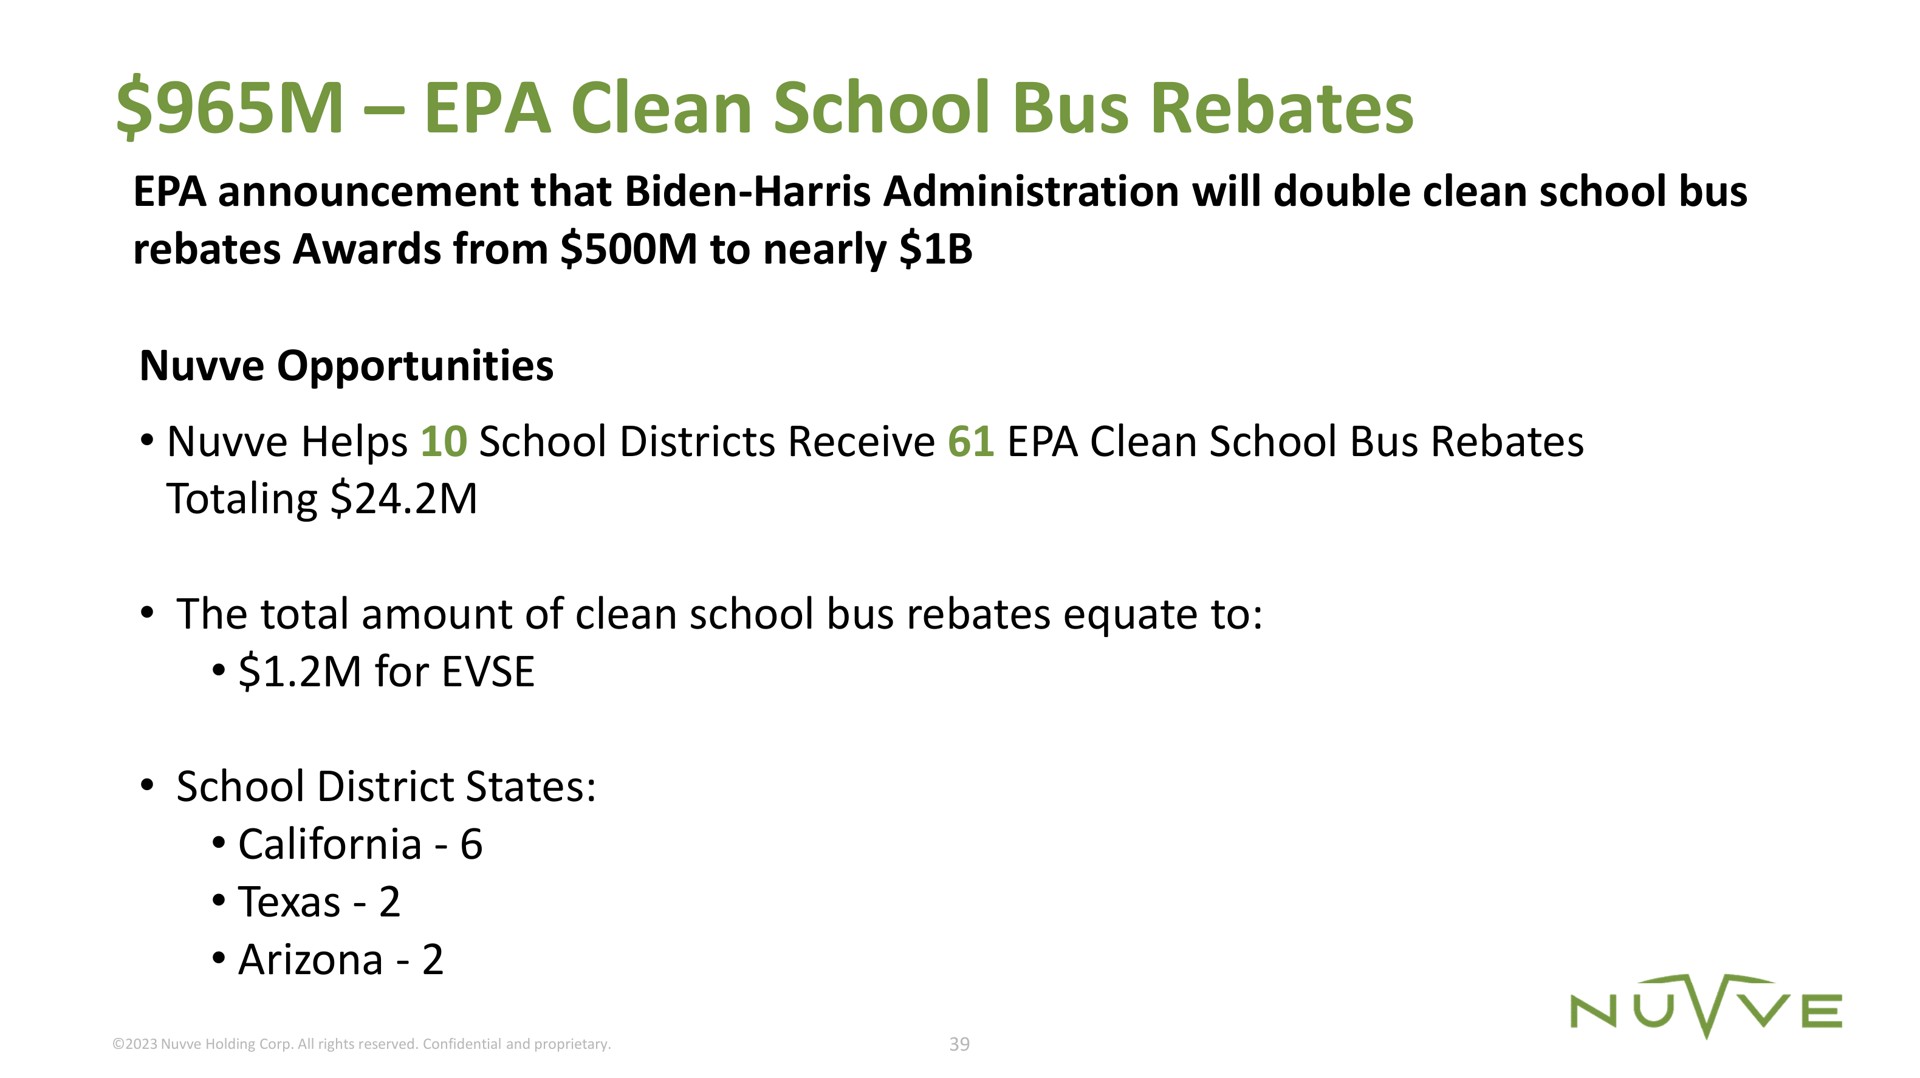 clean school bus rebates announcement that administration will double clean school bus rebates awards from to nearly opportunities helps school districts receive clean school bus rebates totaling the total amount of clean school bus rebates equate to for school district states | Nuvve